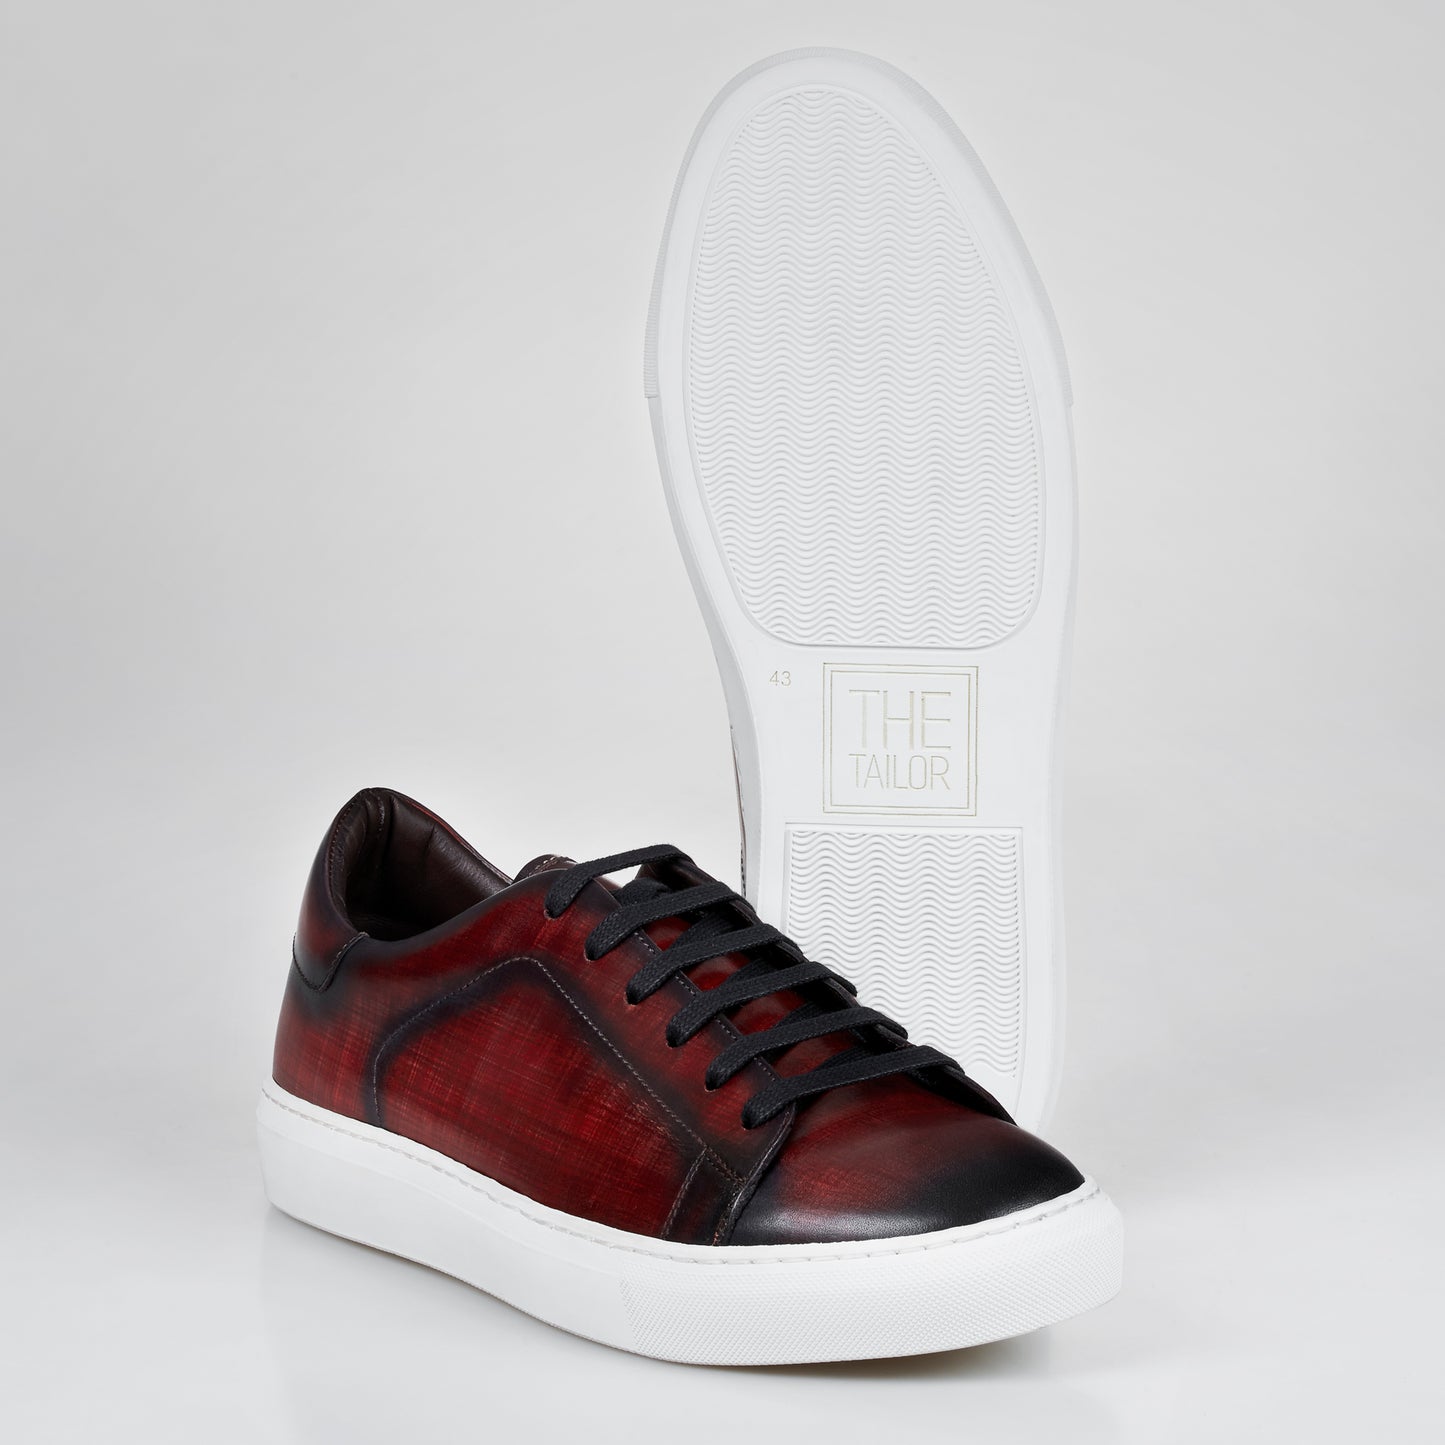 THE TAILOR Trainer Smart Patina